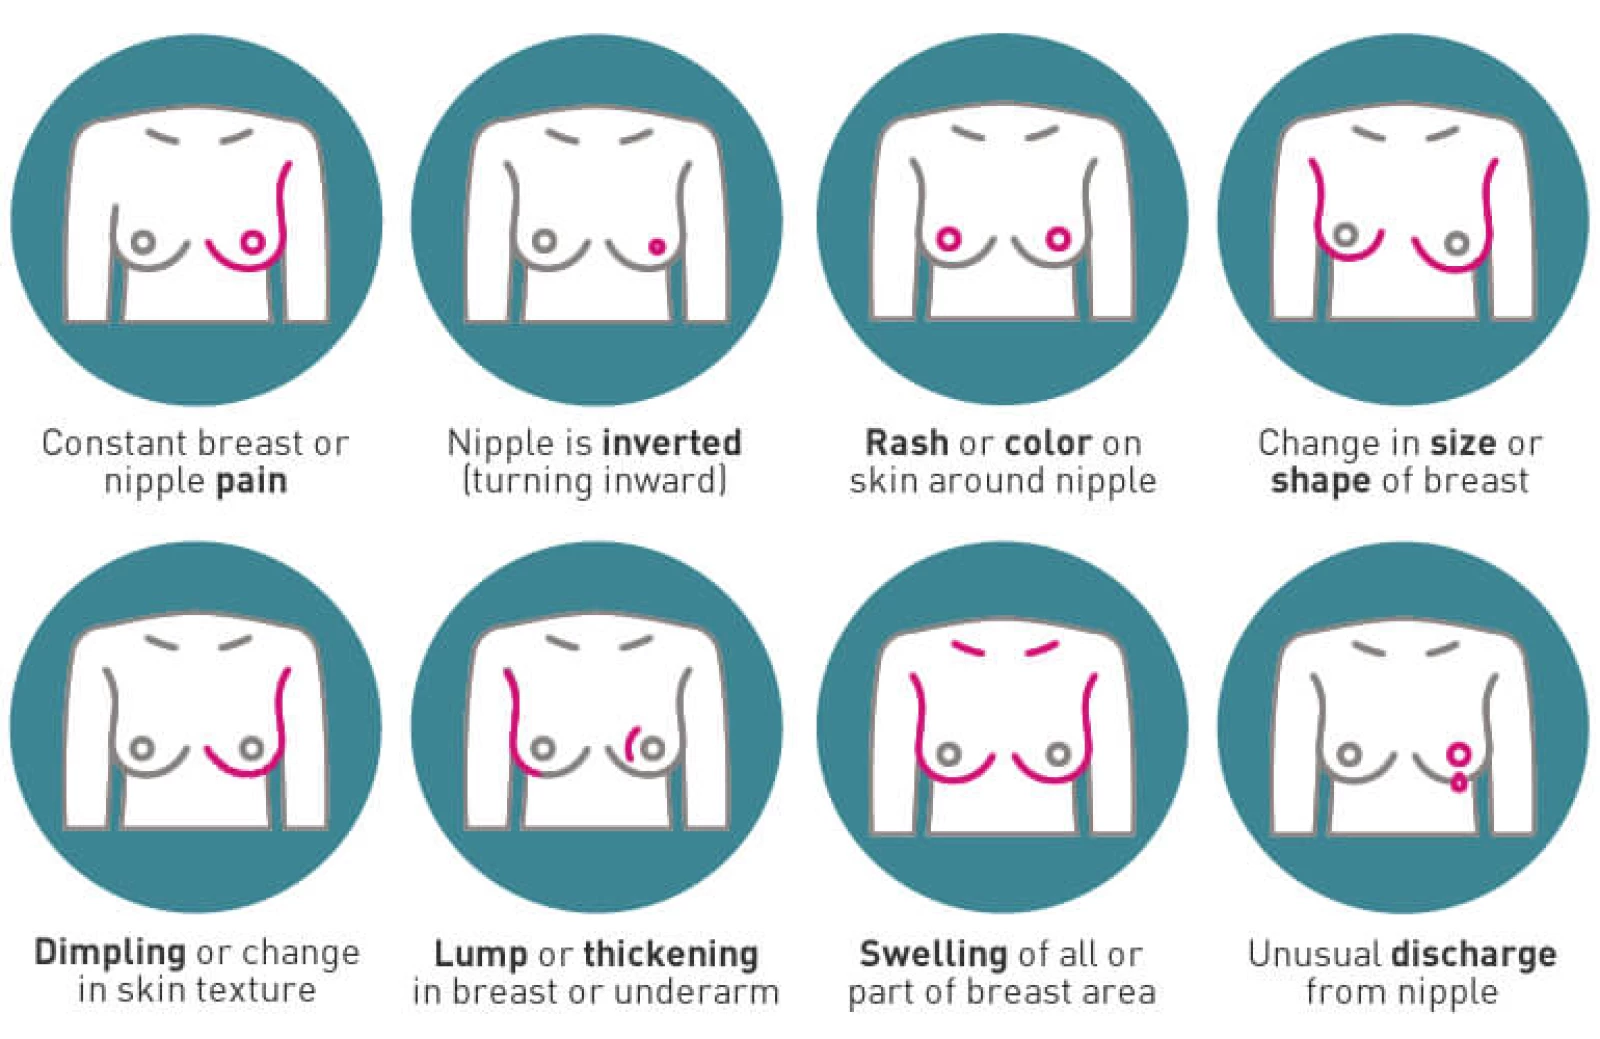 https://youngsurvival.org/asset/63a1e8657fced/breast-cancer-signs-and-symptoms.jpeg?w=1600&fit=max&fm=webp